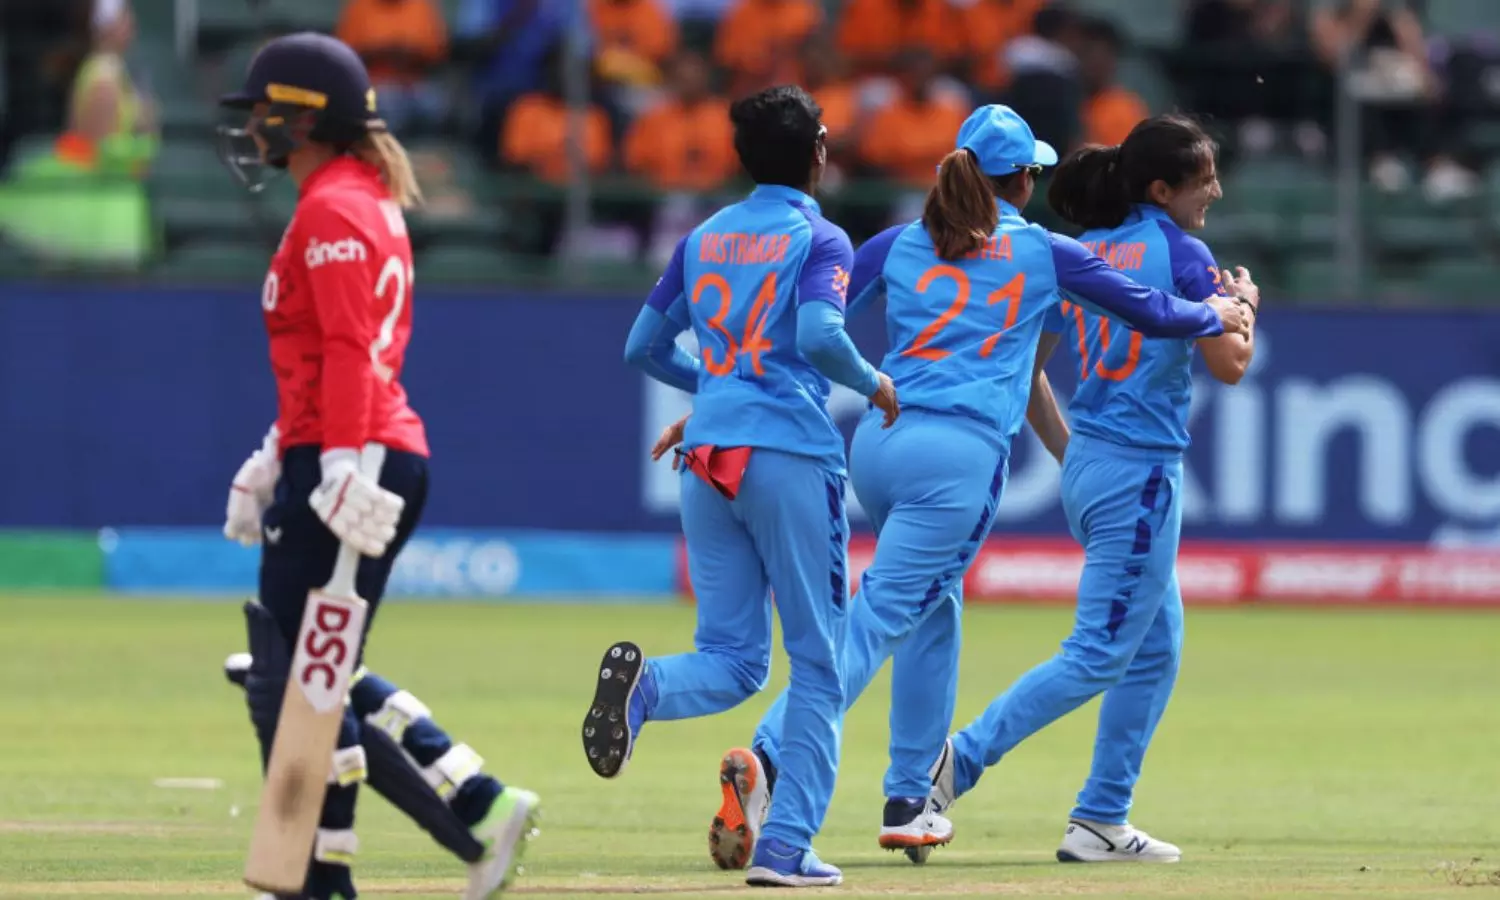 Womens T20 World Cup HIGHLIGHTS India beat Ireland by 5 runs on DLS